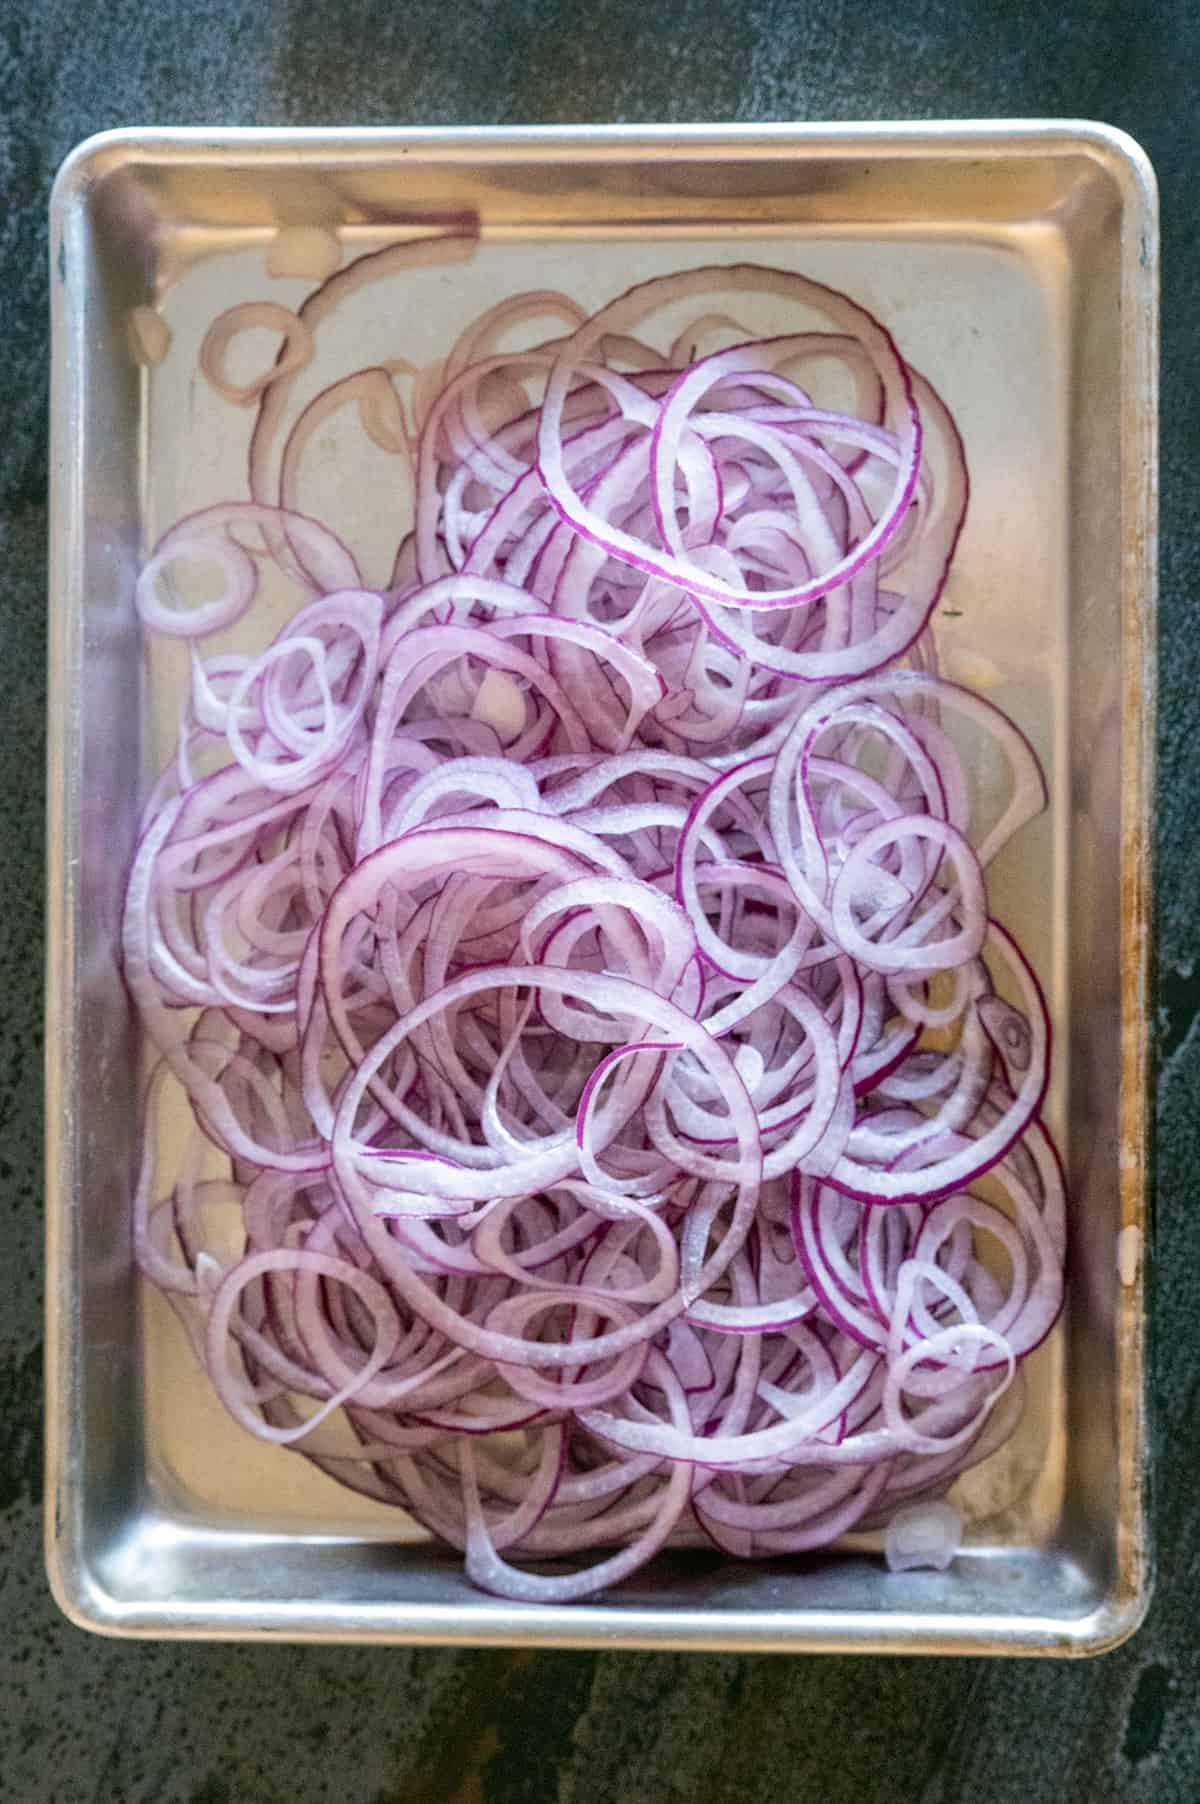 Sheet pan of thinly sliced red onions.